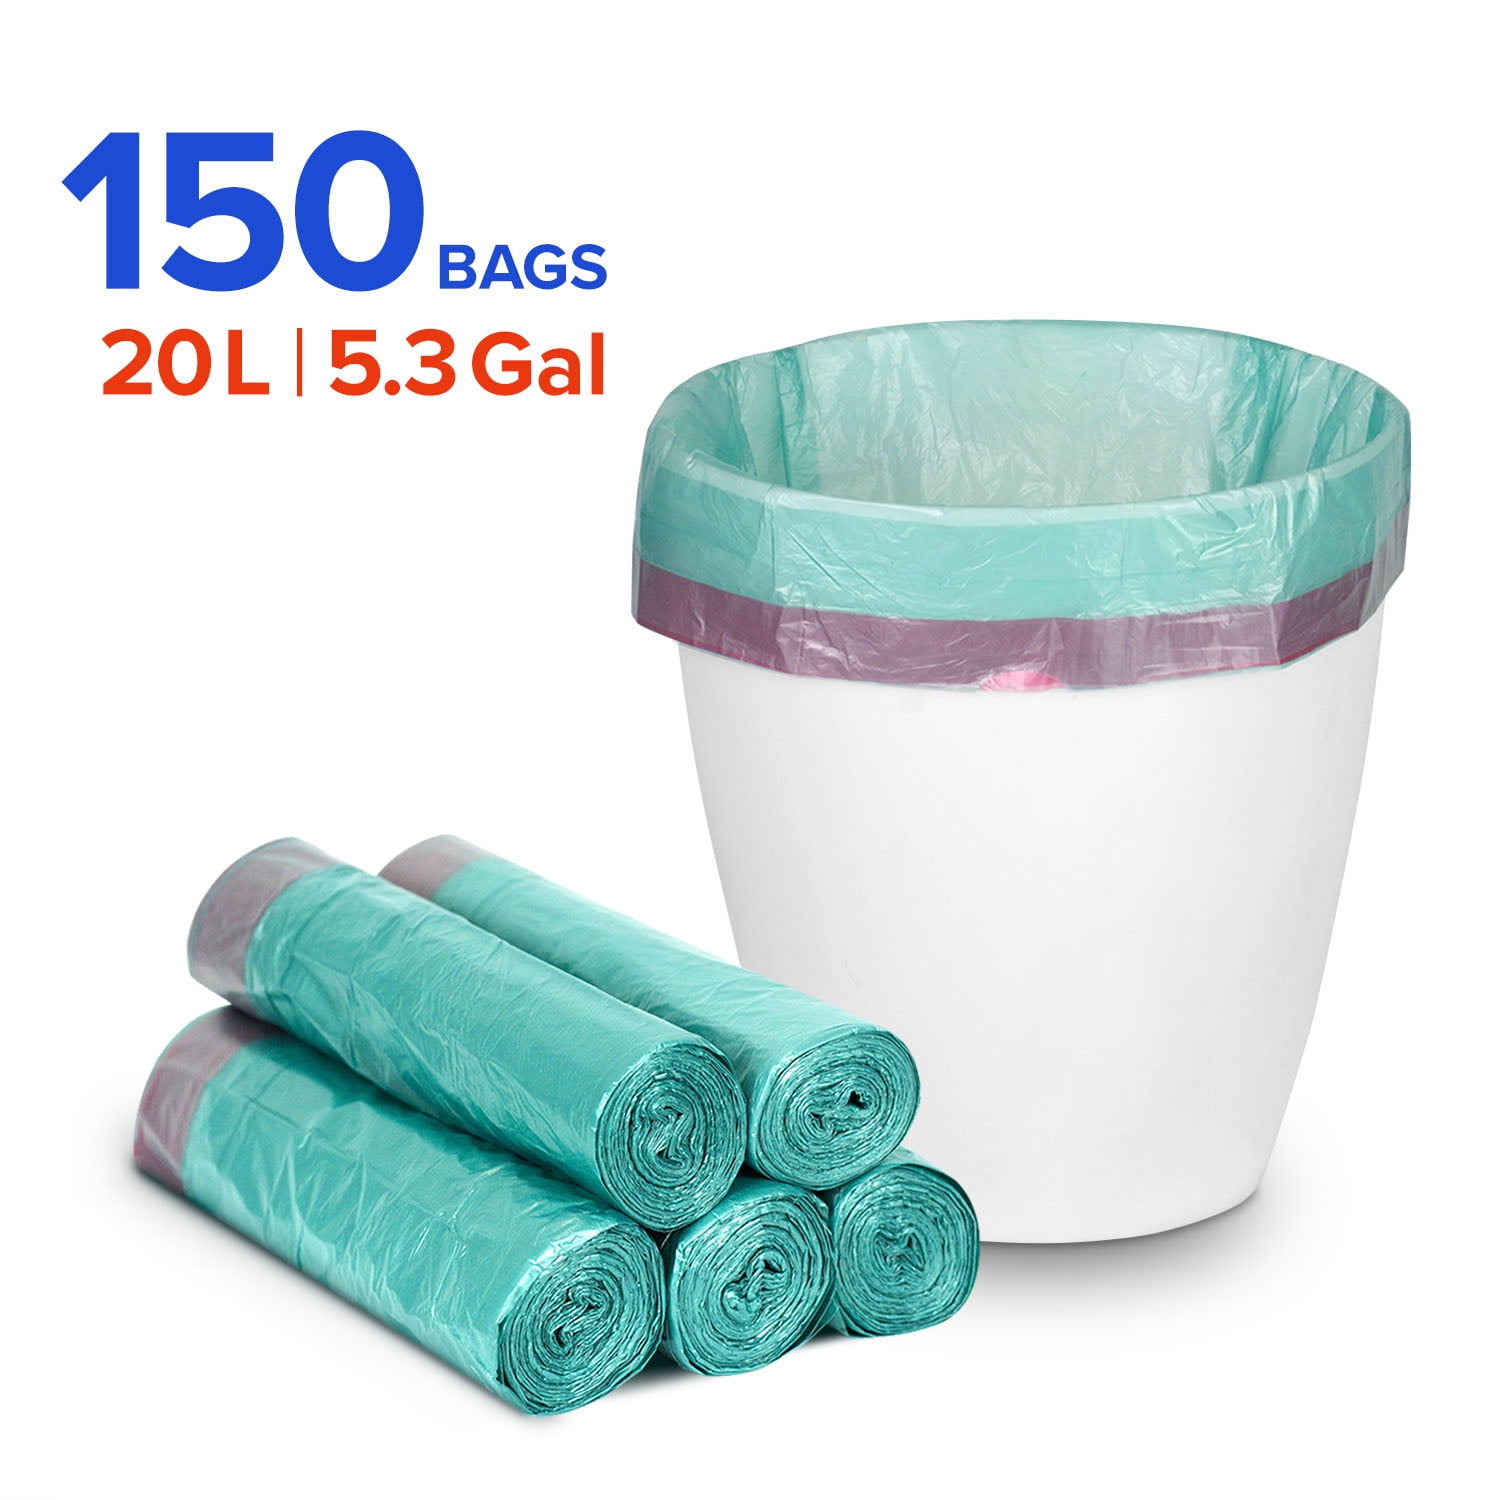 LSP 75PCS 20 Liter Trash Bags Durable Disposable Green Perforated